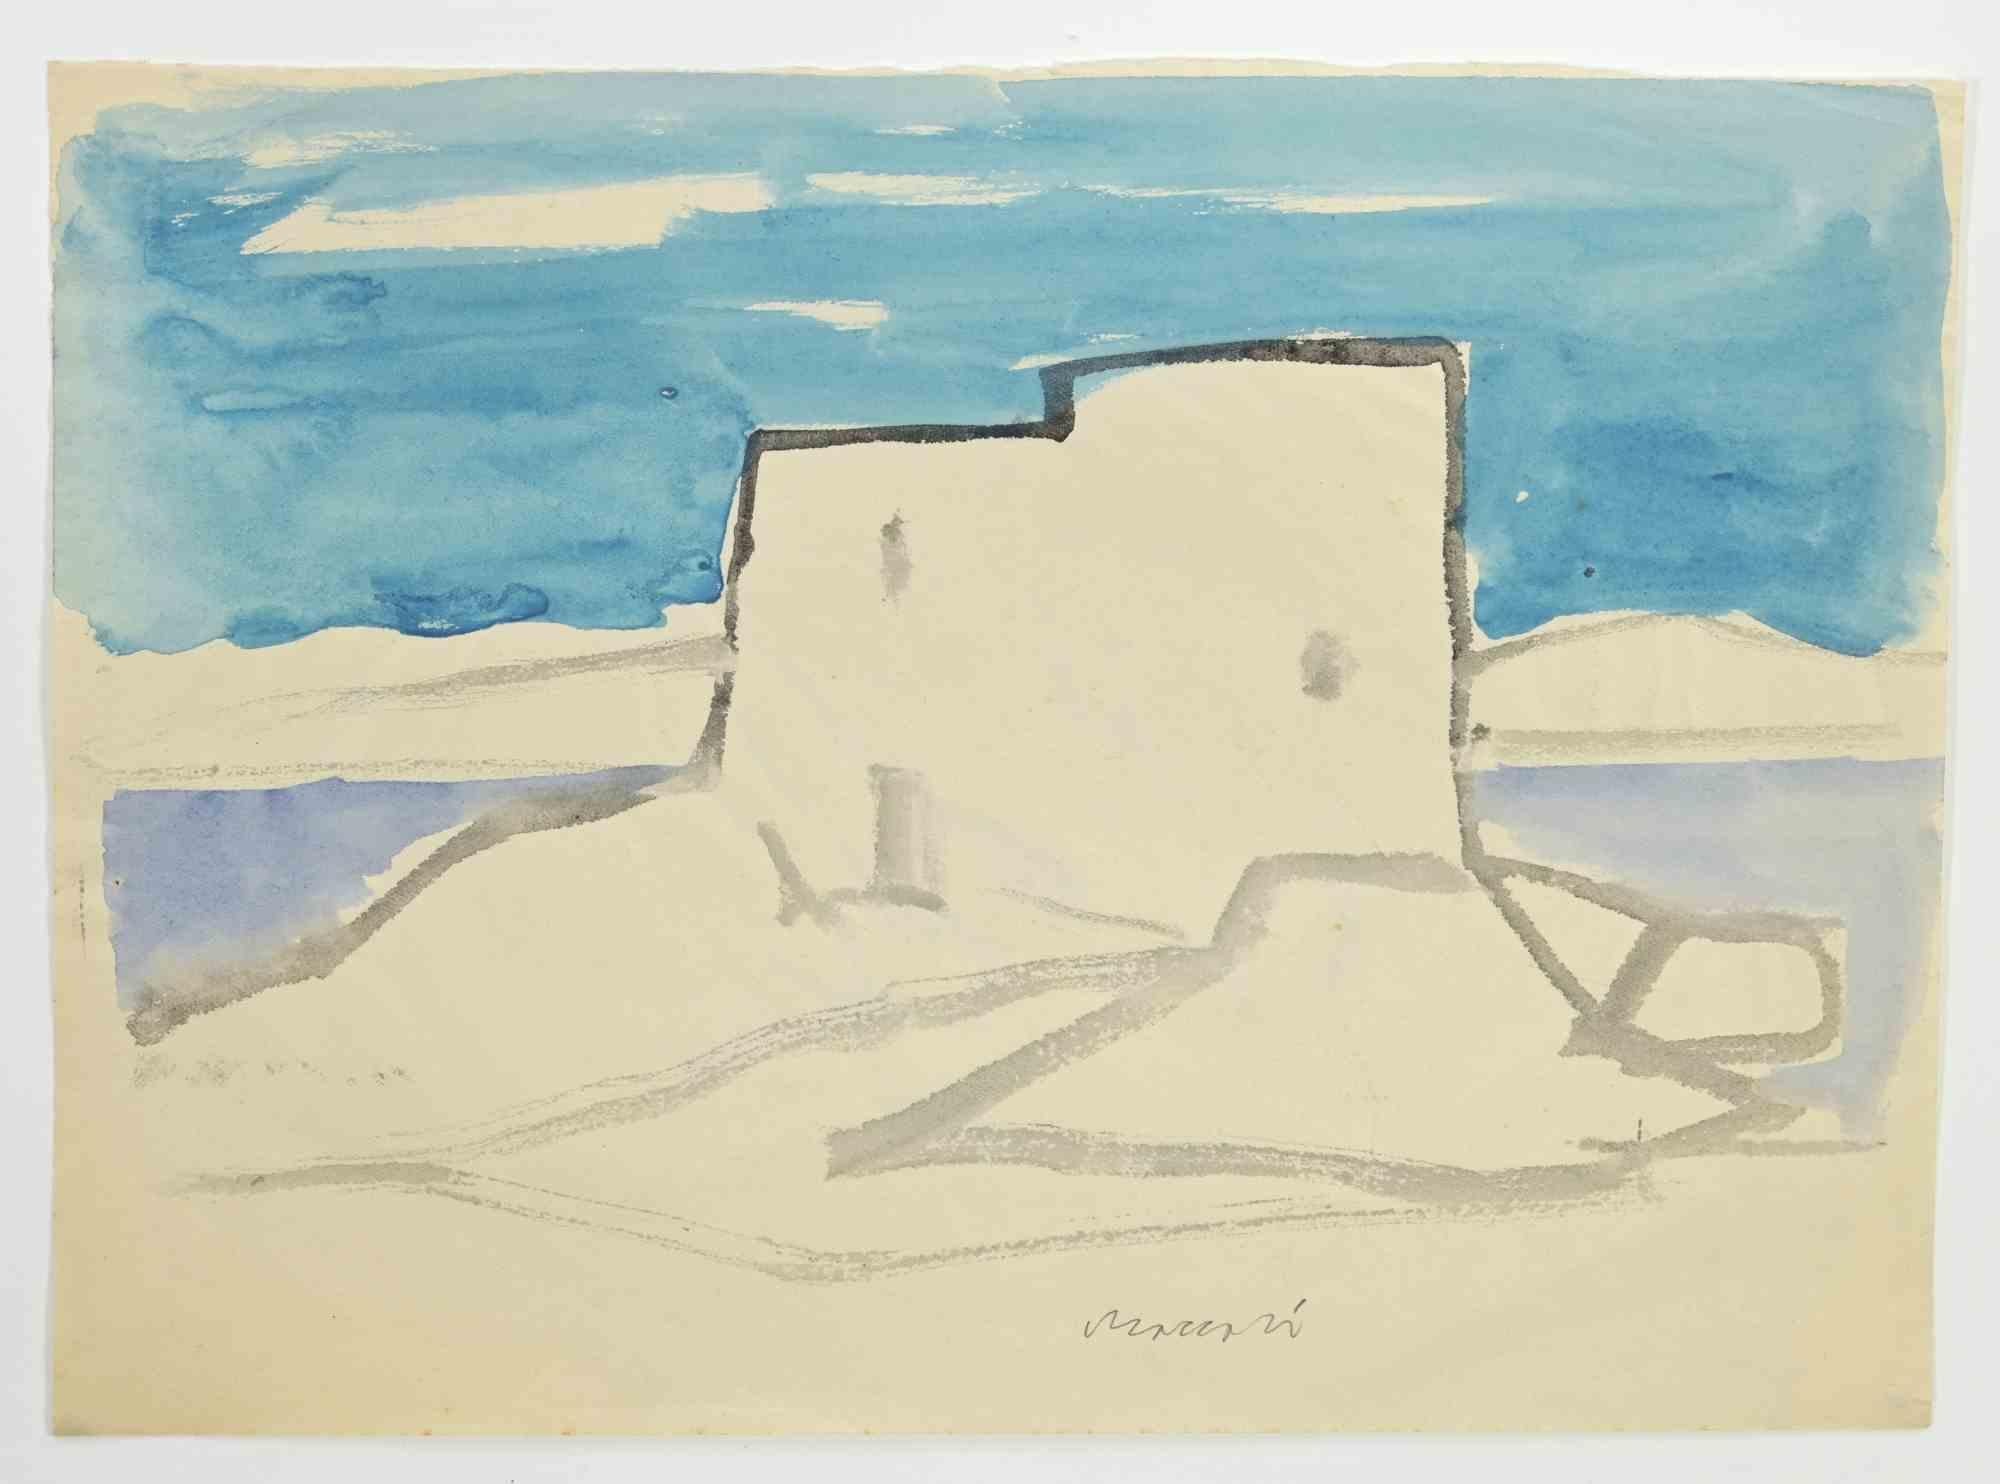 The Seascape - Drawing by Mino Maccari - 1960s